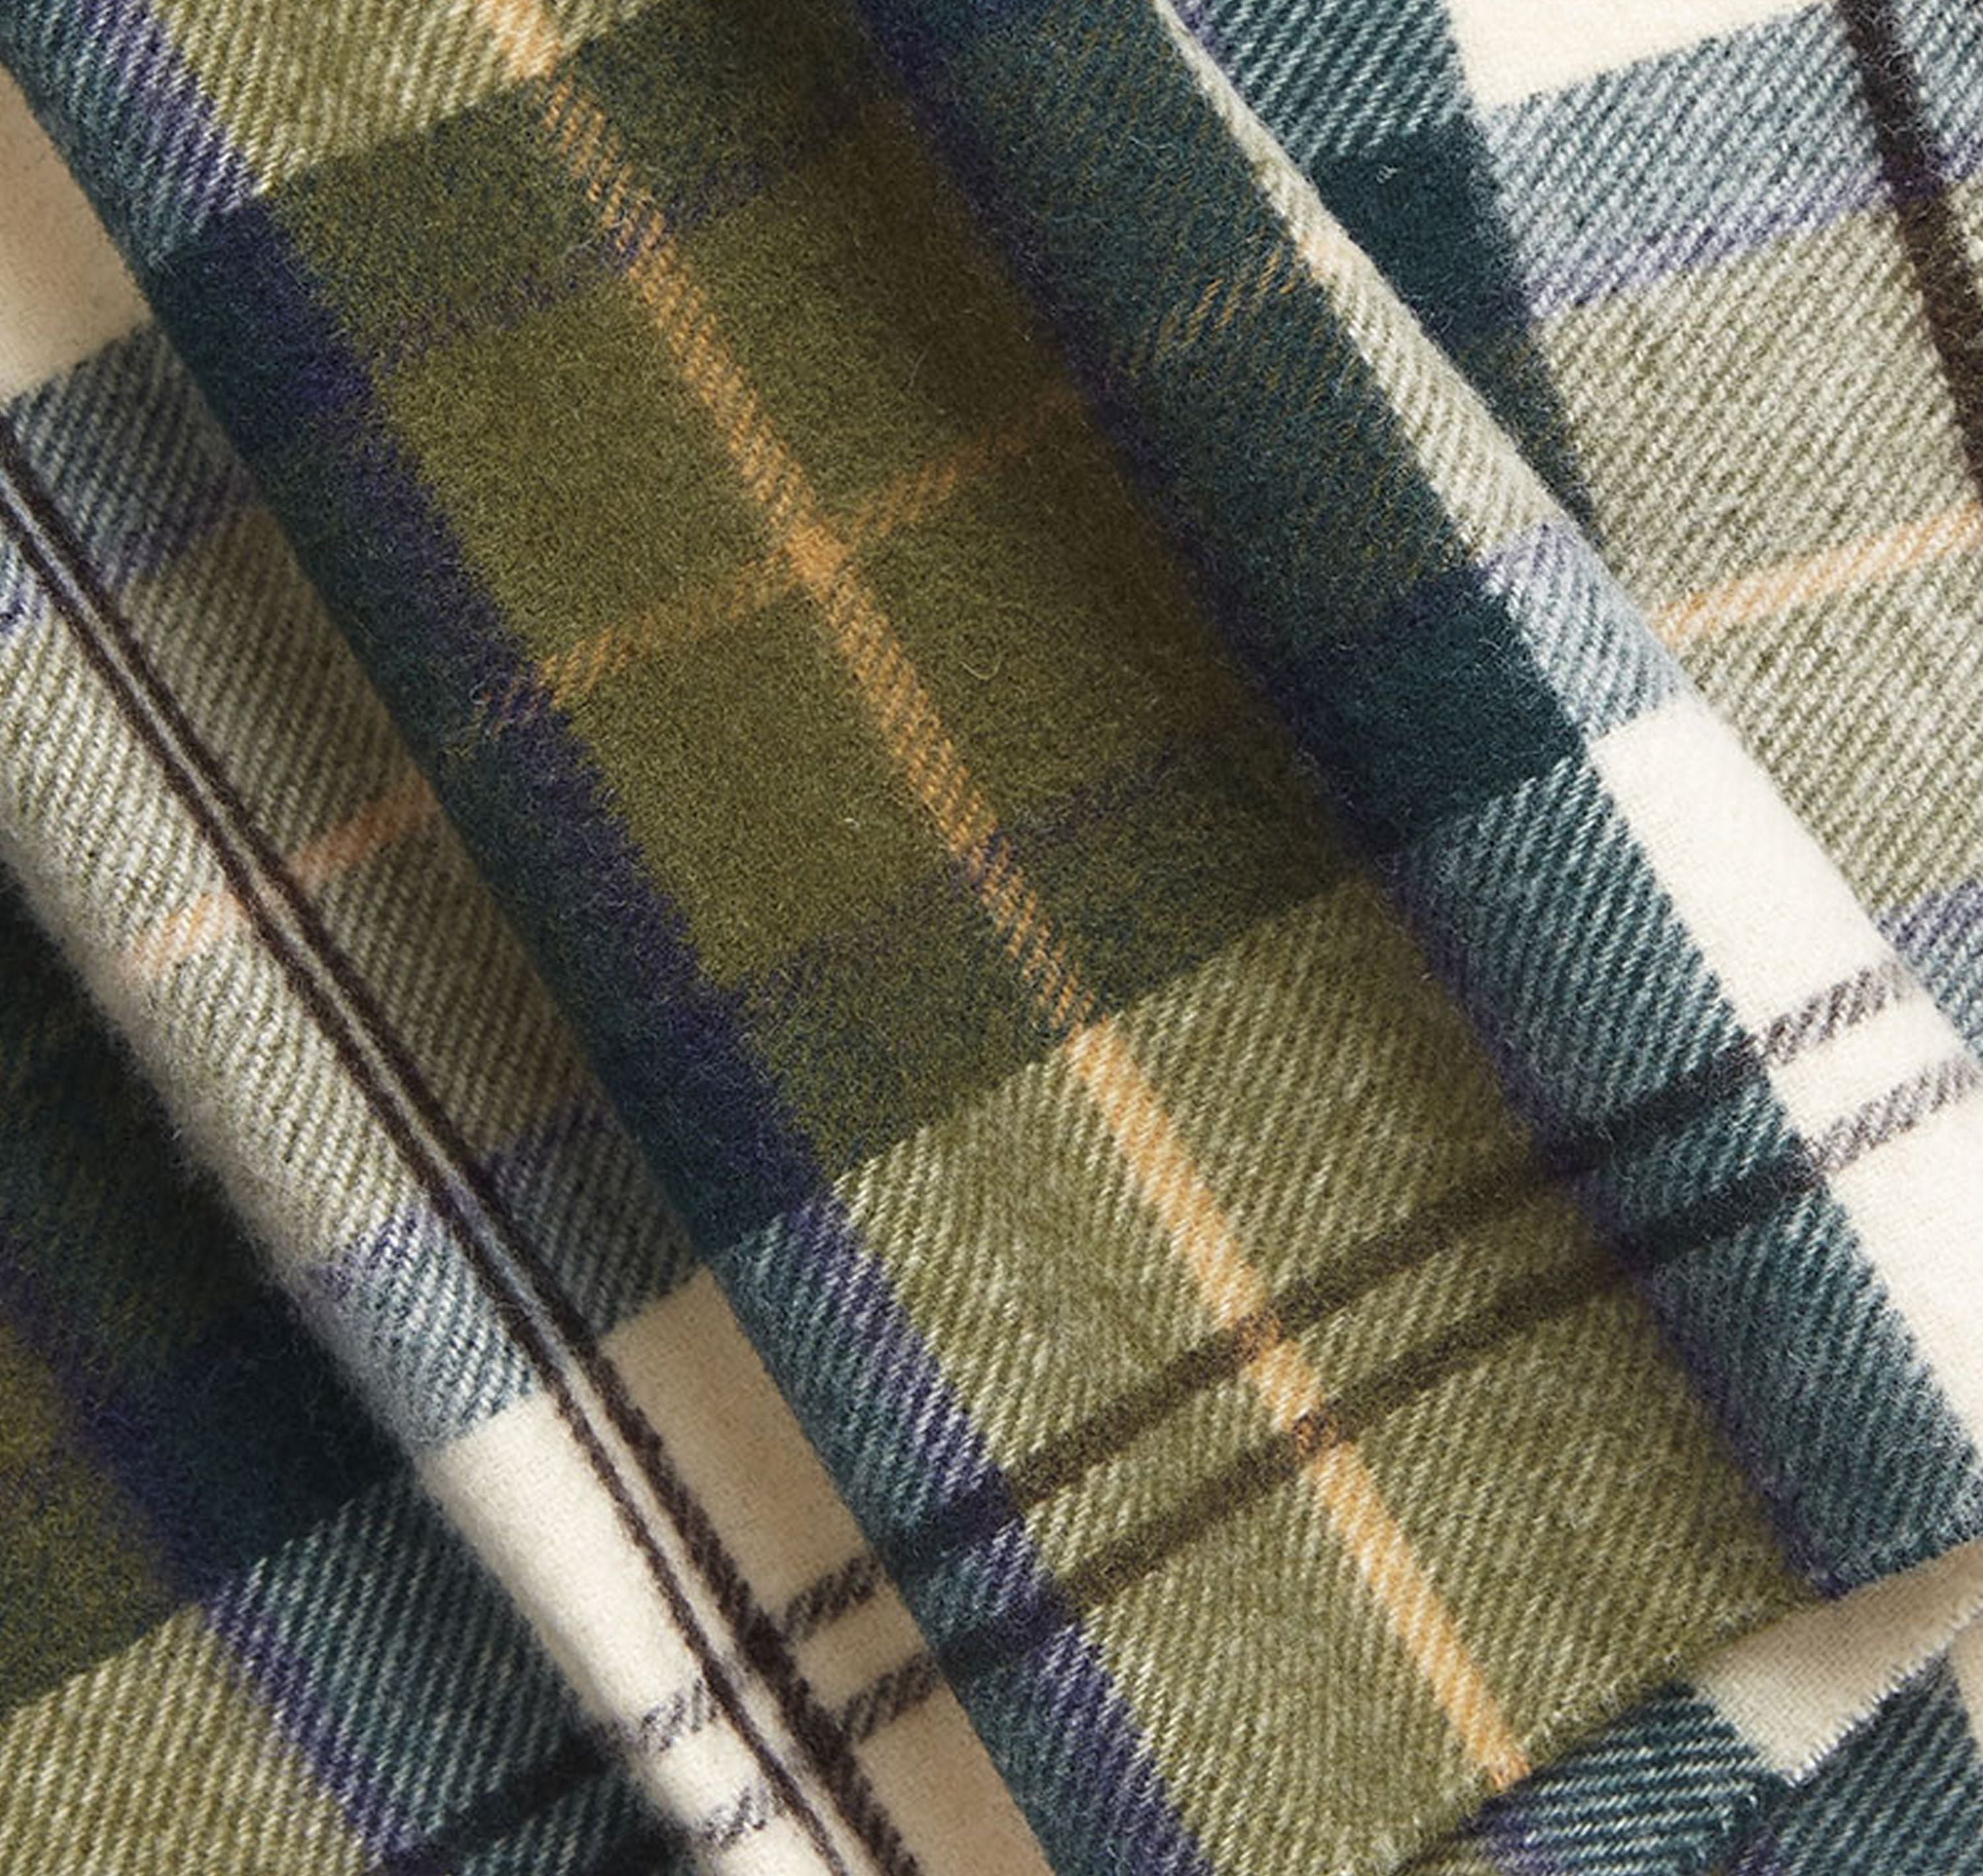 Barbour Wool & Cashmere Ancient Tartan Scarf